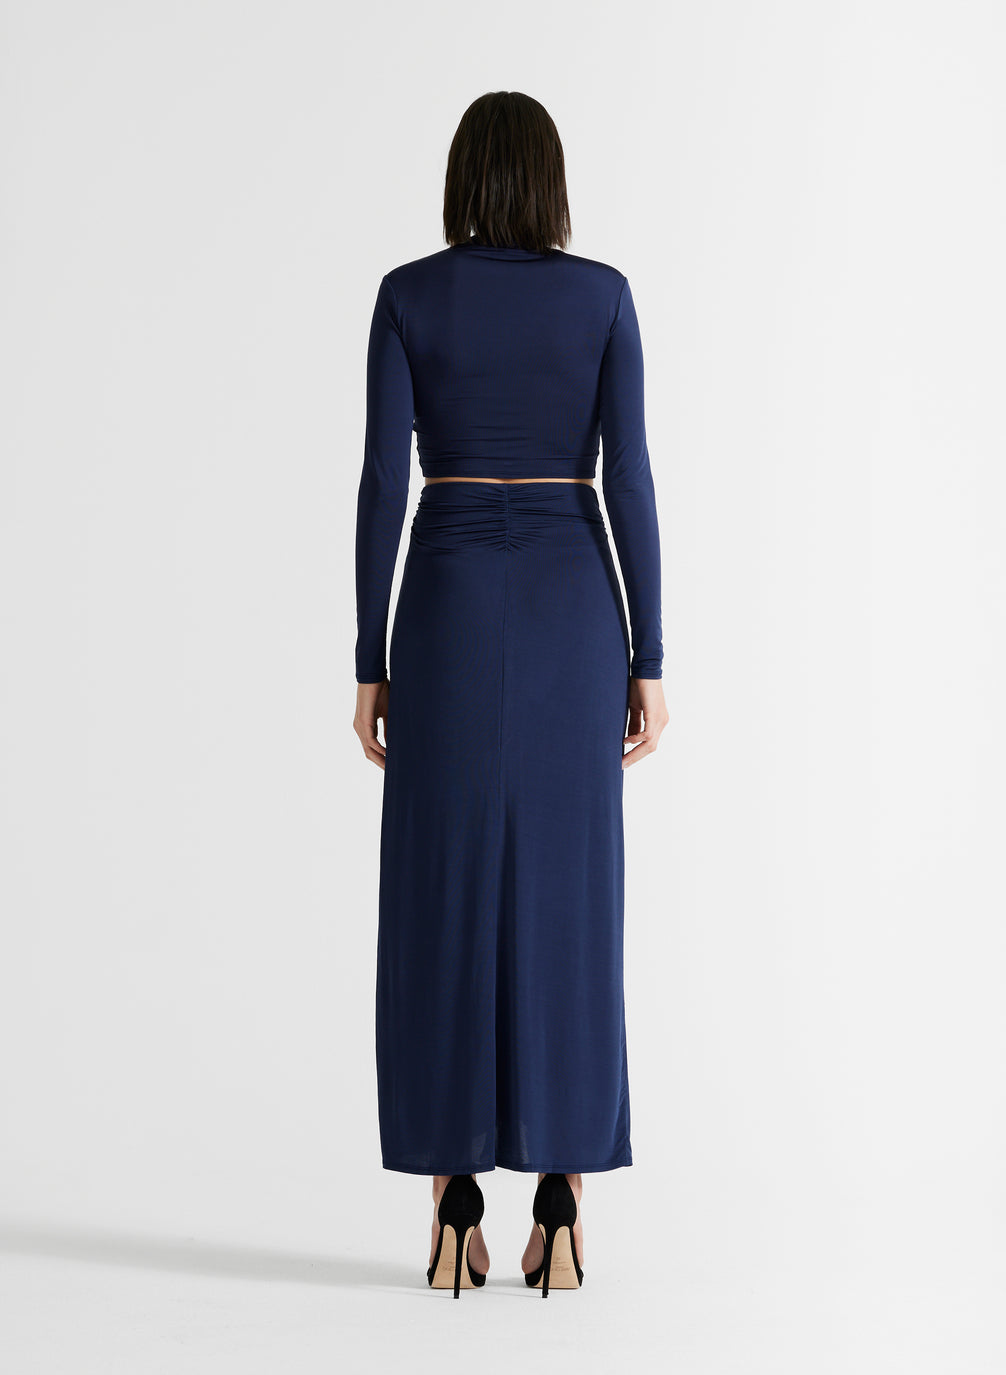 back view of woman in navy blue ruched crop top and matching navy blue maxi skirt